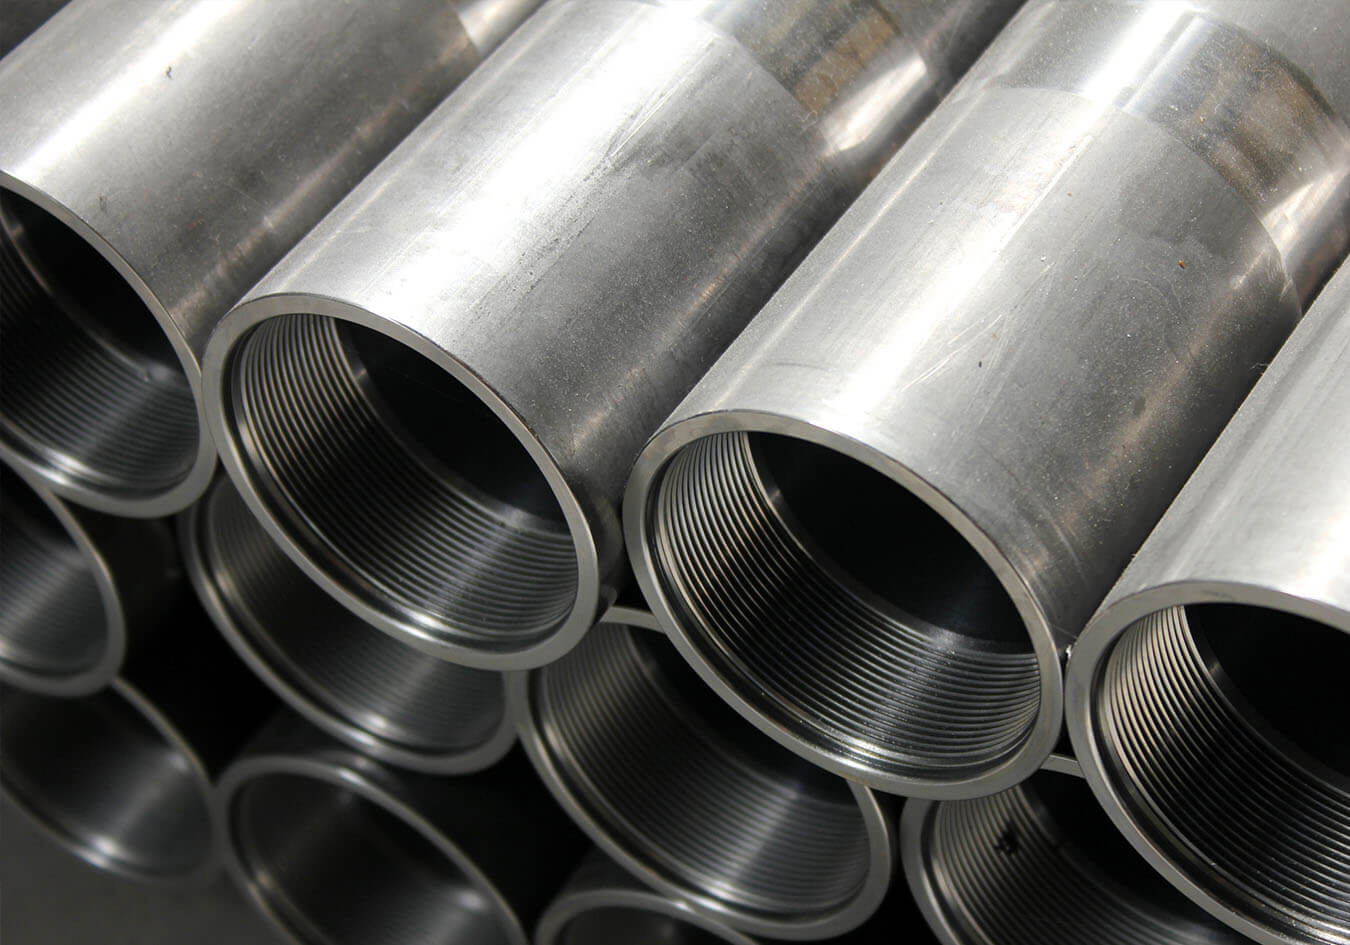 What Is A Metal Conduit Made Of